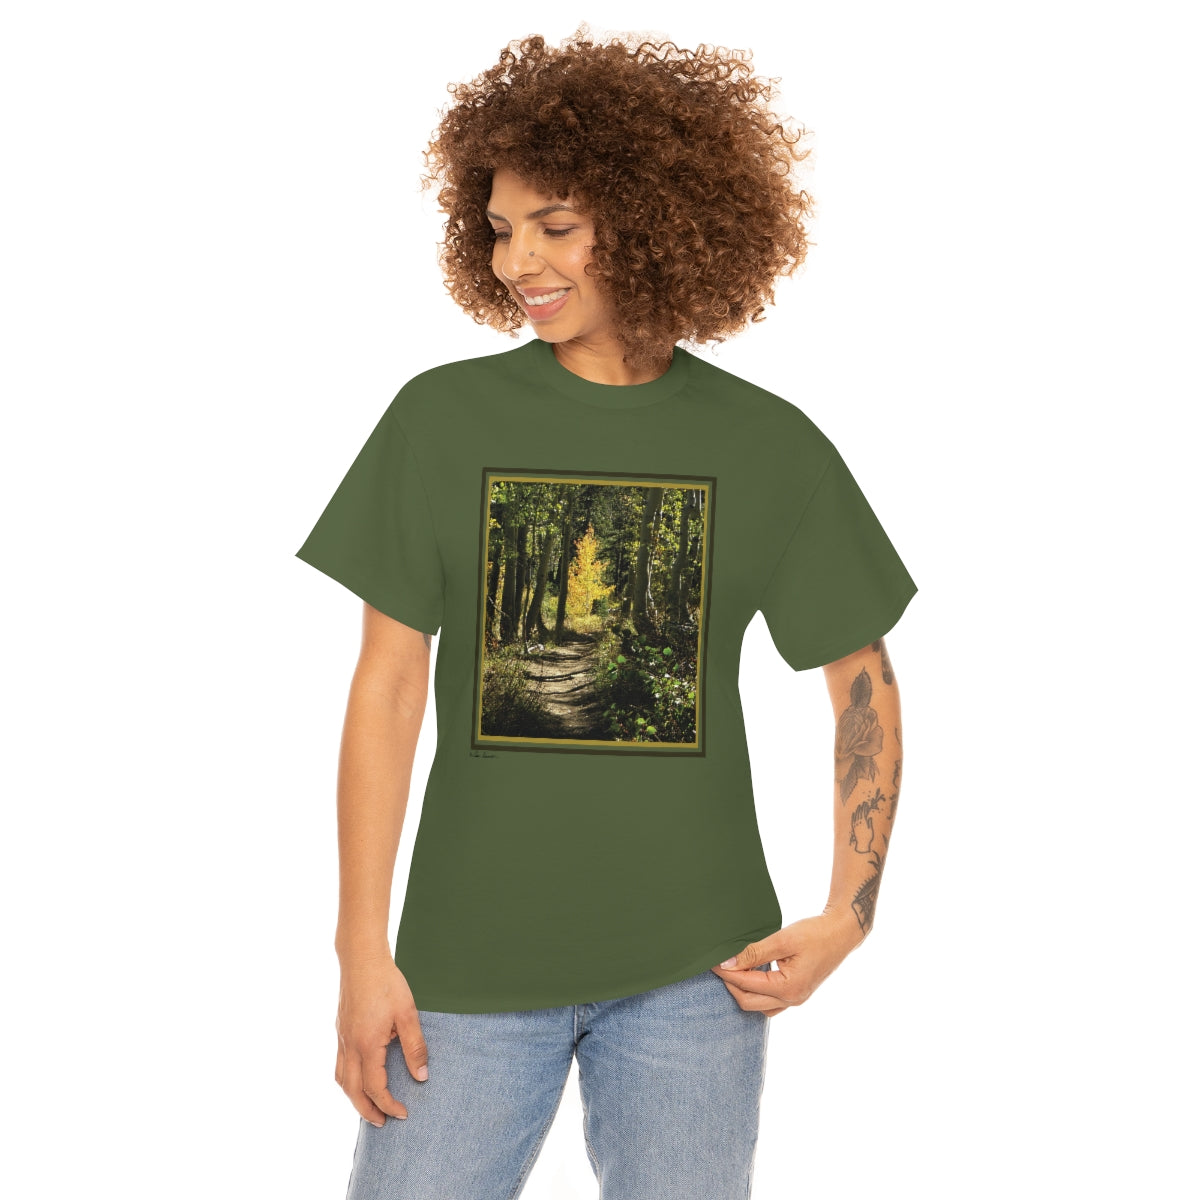 Mock up of a slim woman wearing the t-shirt